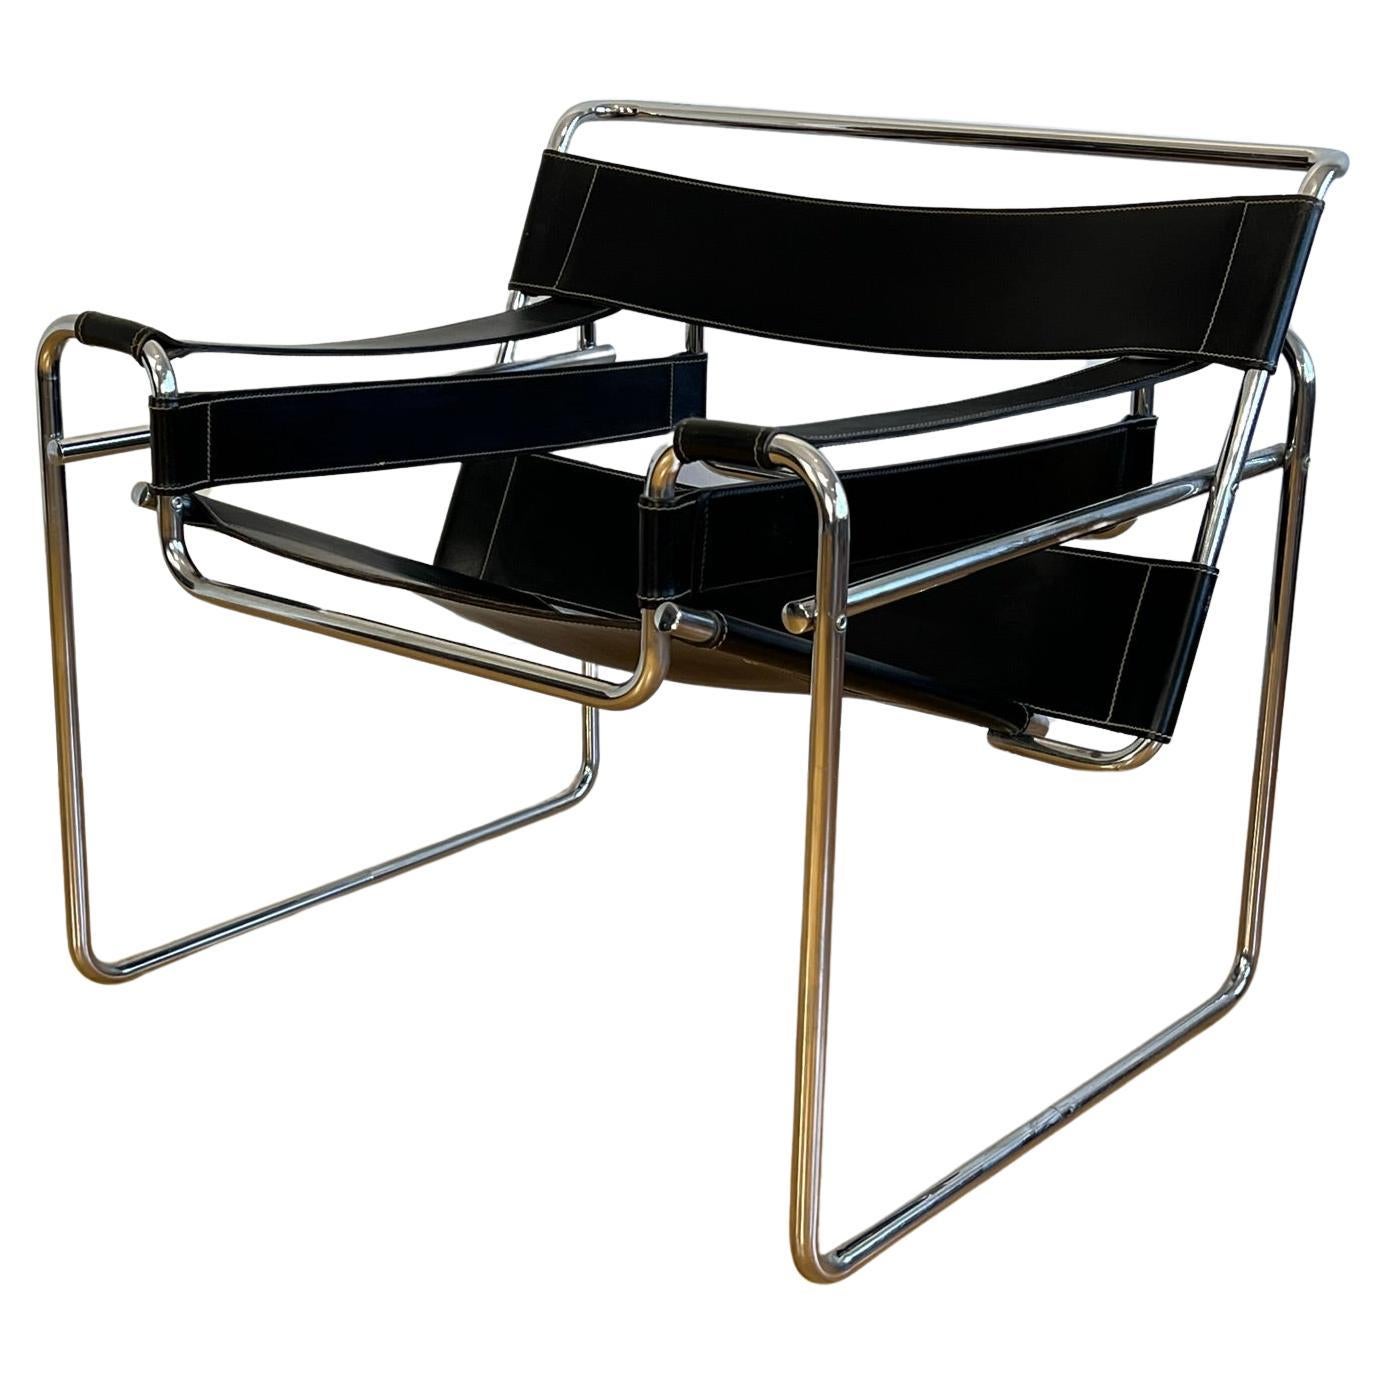 What is Marcel Breuer known for?